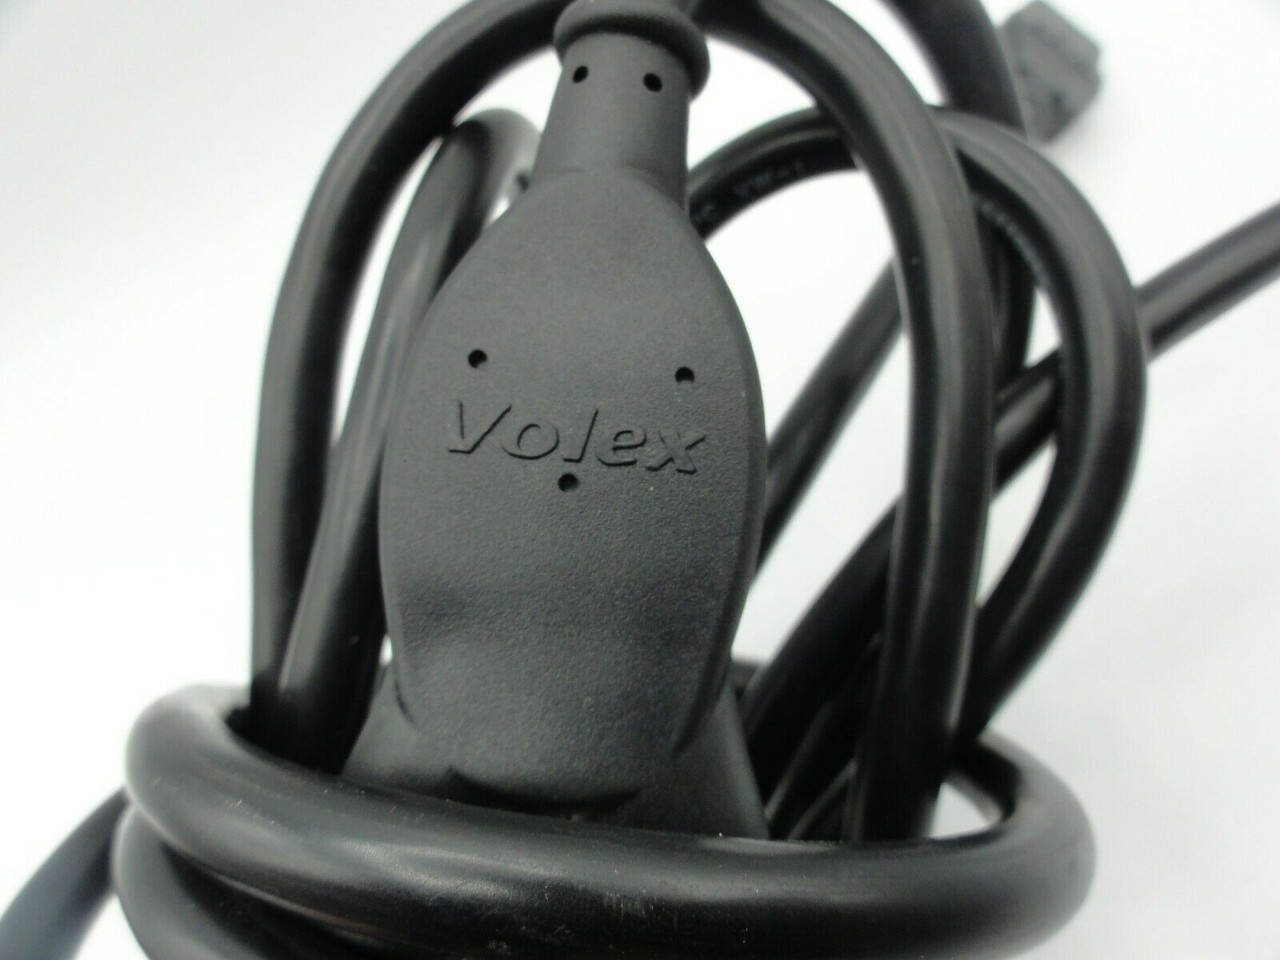 Volex Dual Headed V1625 Power Cable Power Cord, LL110850 TYPE SJT 3x2.08mm